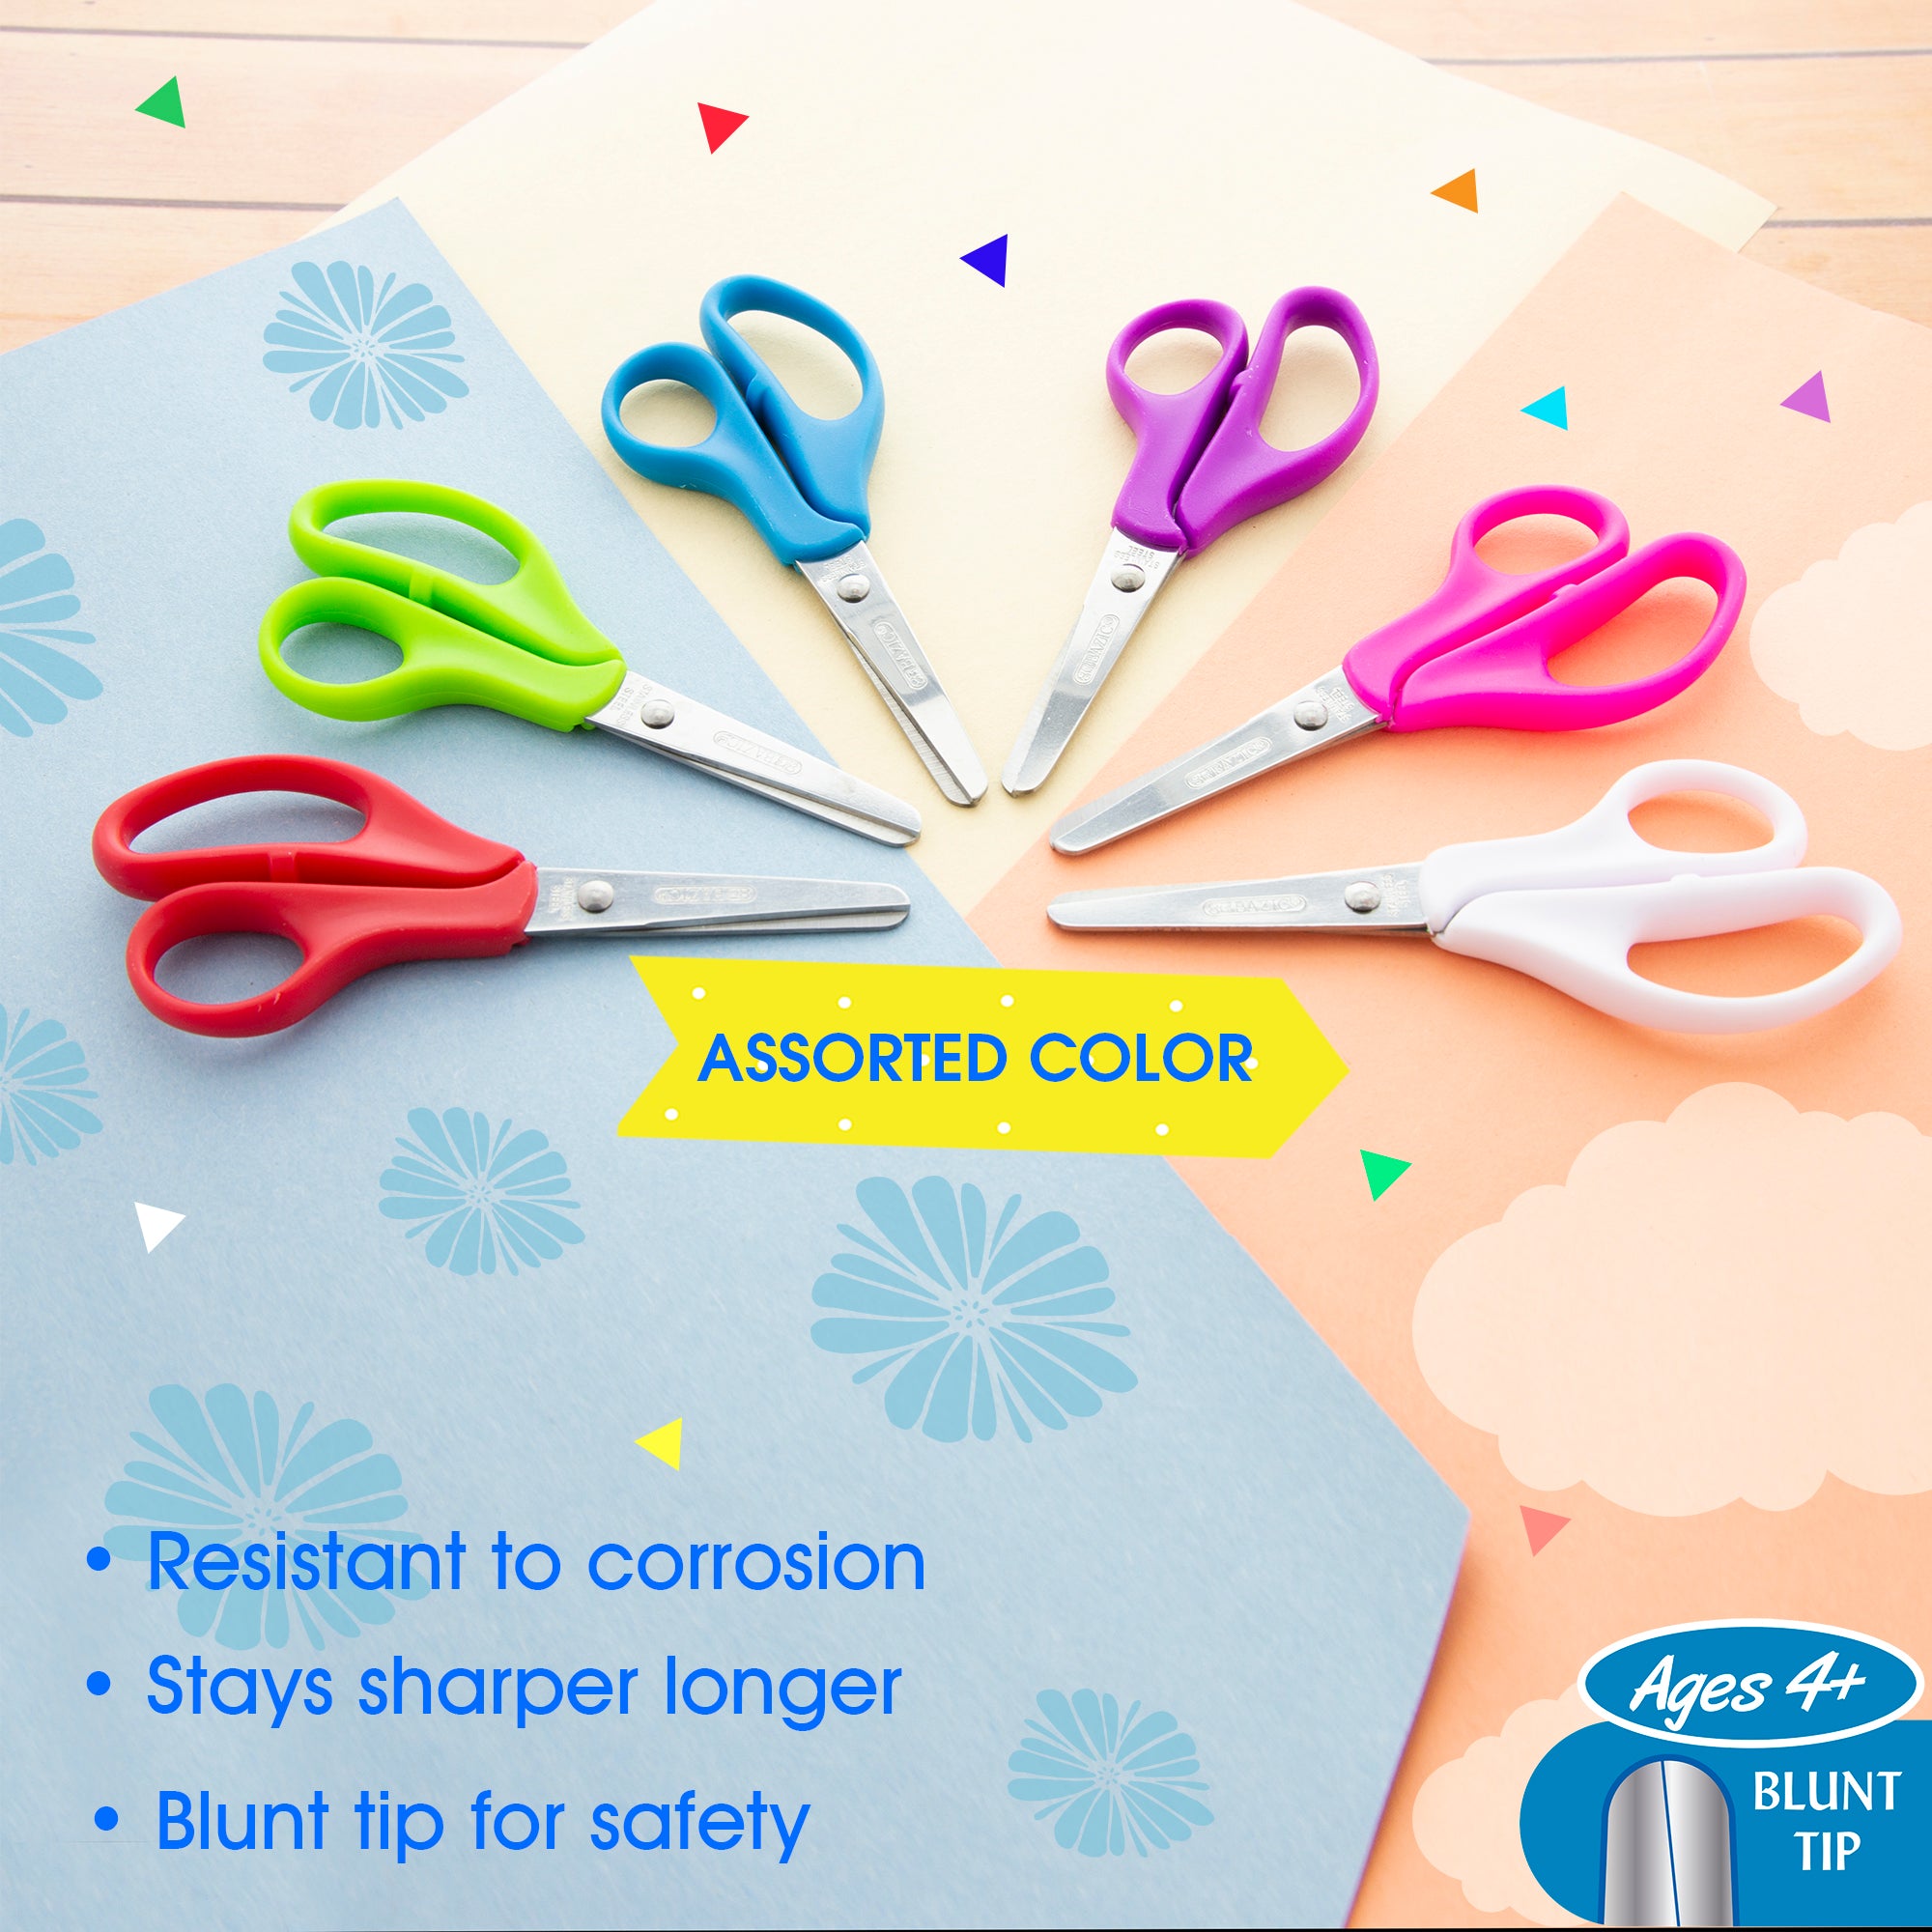 Kids Scissors 5 - 12 Pack - School Pack of Scissors for Kids Age 3 and up,  Assorted Colors (Pointed Tip)